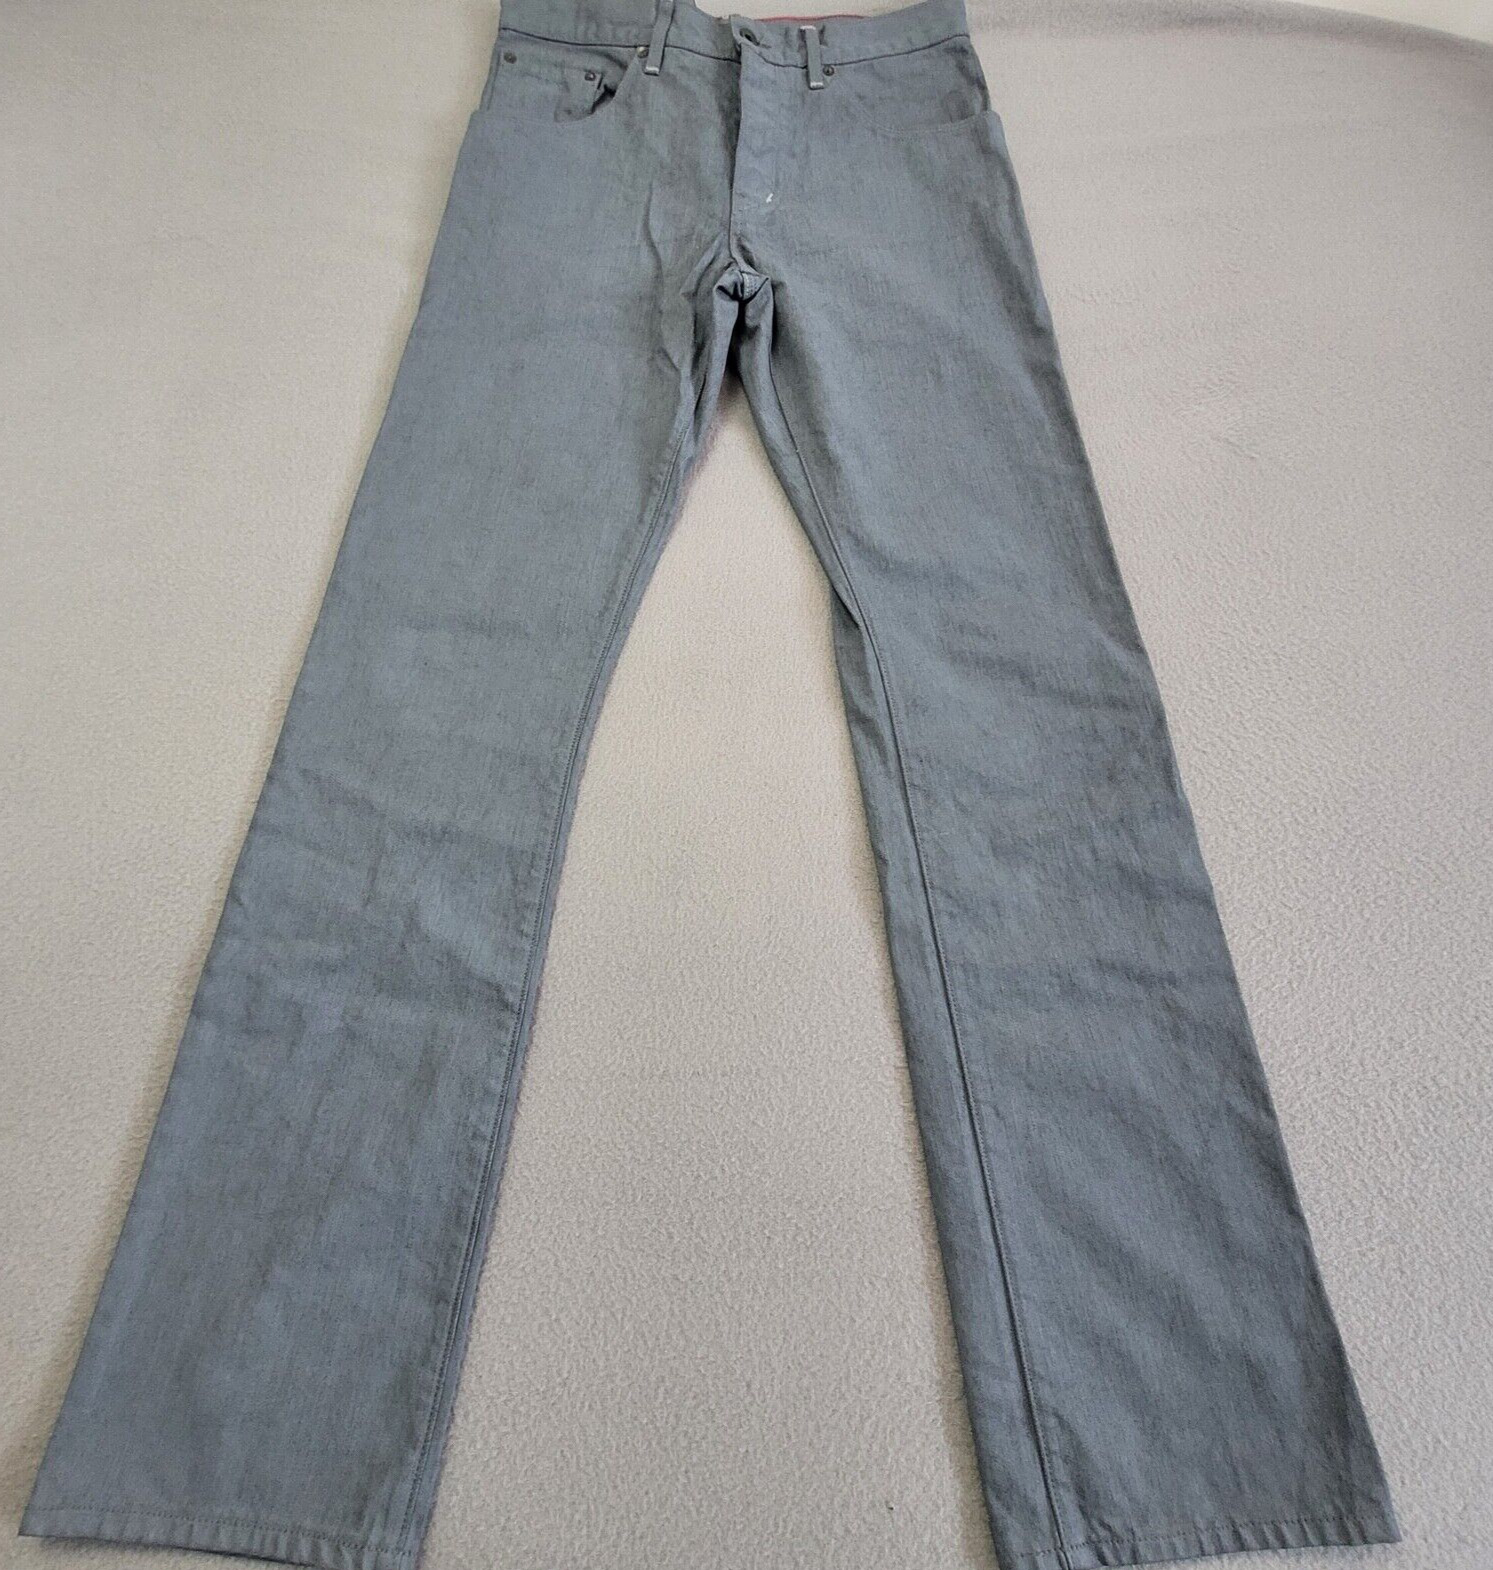 Raleigh Denim Jeans Mens 33x34 Slim Button Fly Gray Number Patch Handcrafted USA